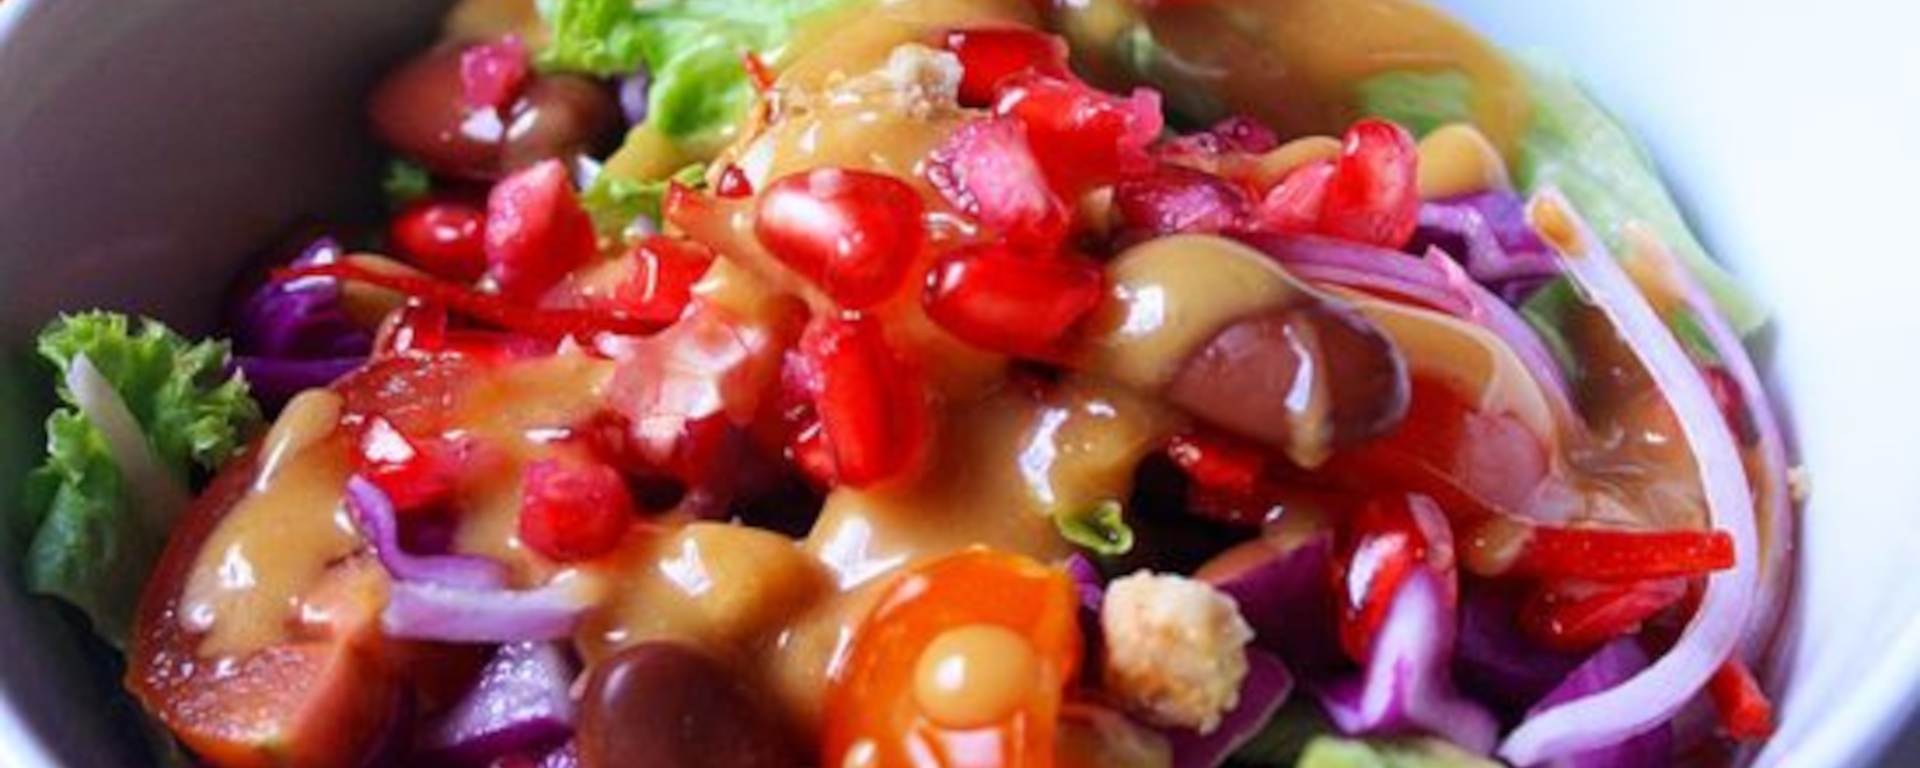 LuvMyRecipe.com - Red Cabbage, Kidney Bean and Pomegranate Salad with Peanut Butter Dressing Featured